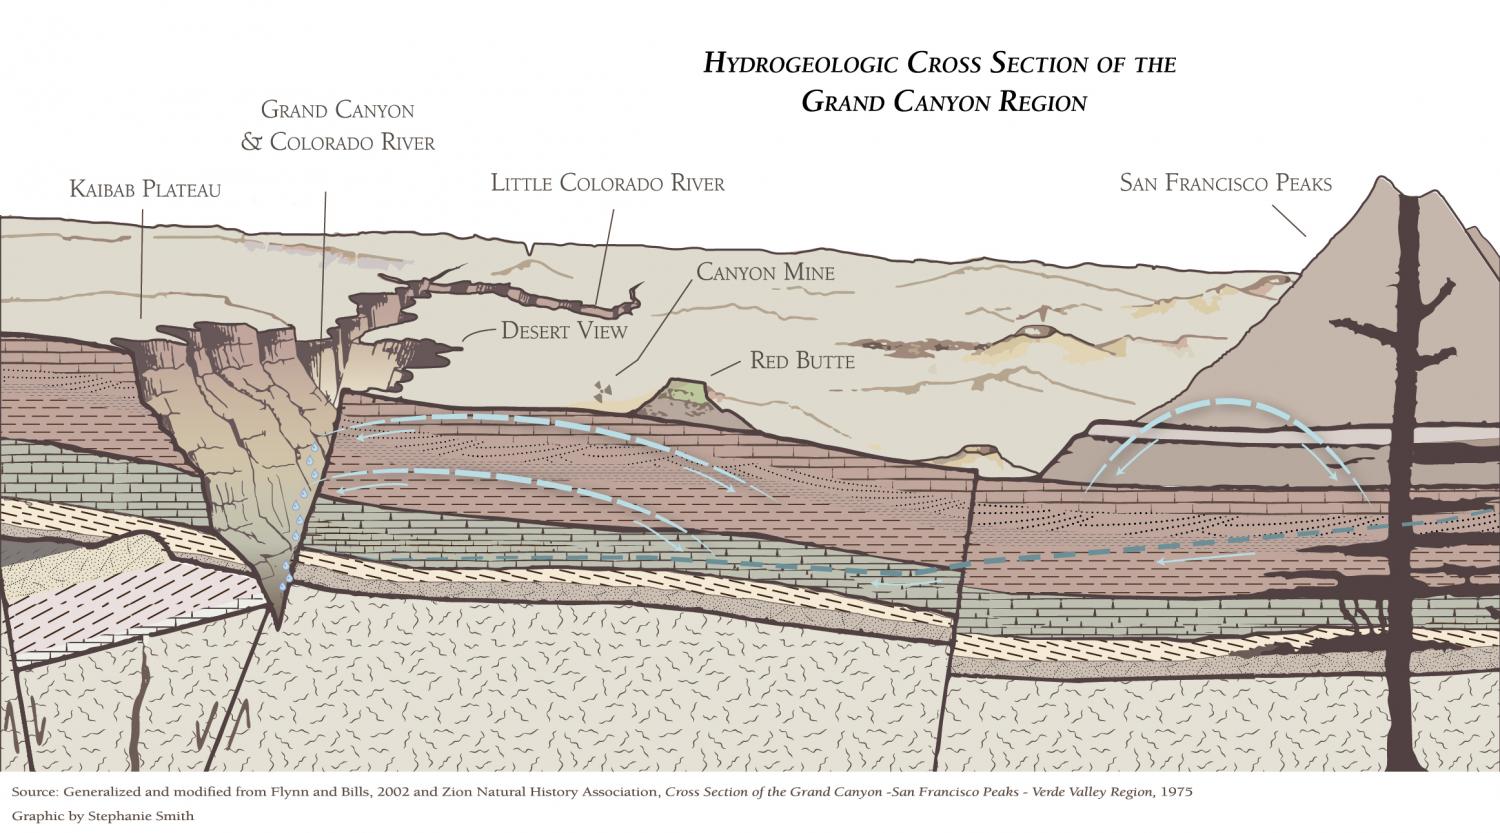 Hydrogeologic Cross Section of the Grand Canyon Region